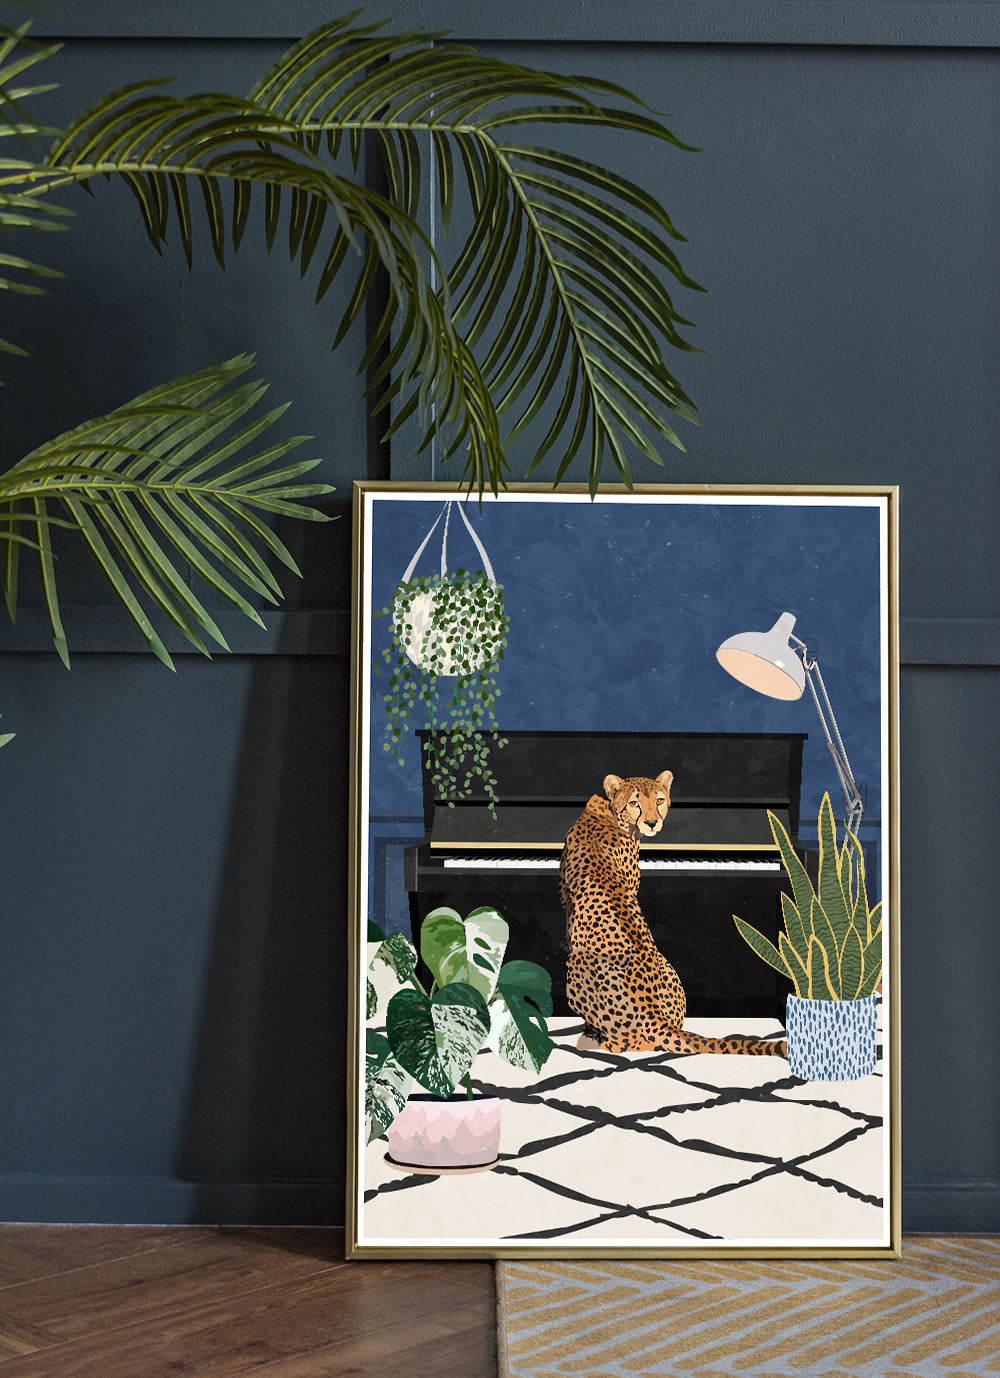 Cheetah Tunes Art Print by Sarah Manovski in a room with blue panelled wall and house plant